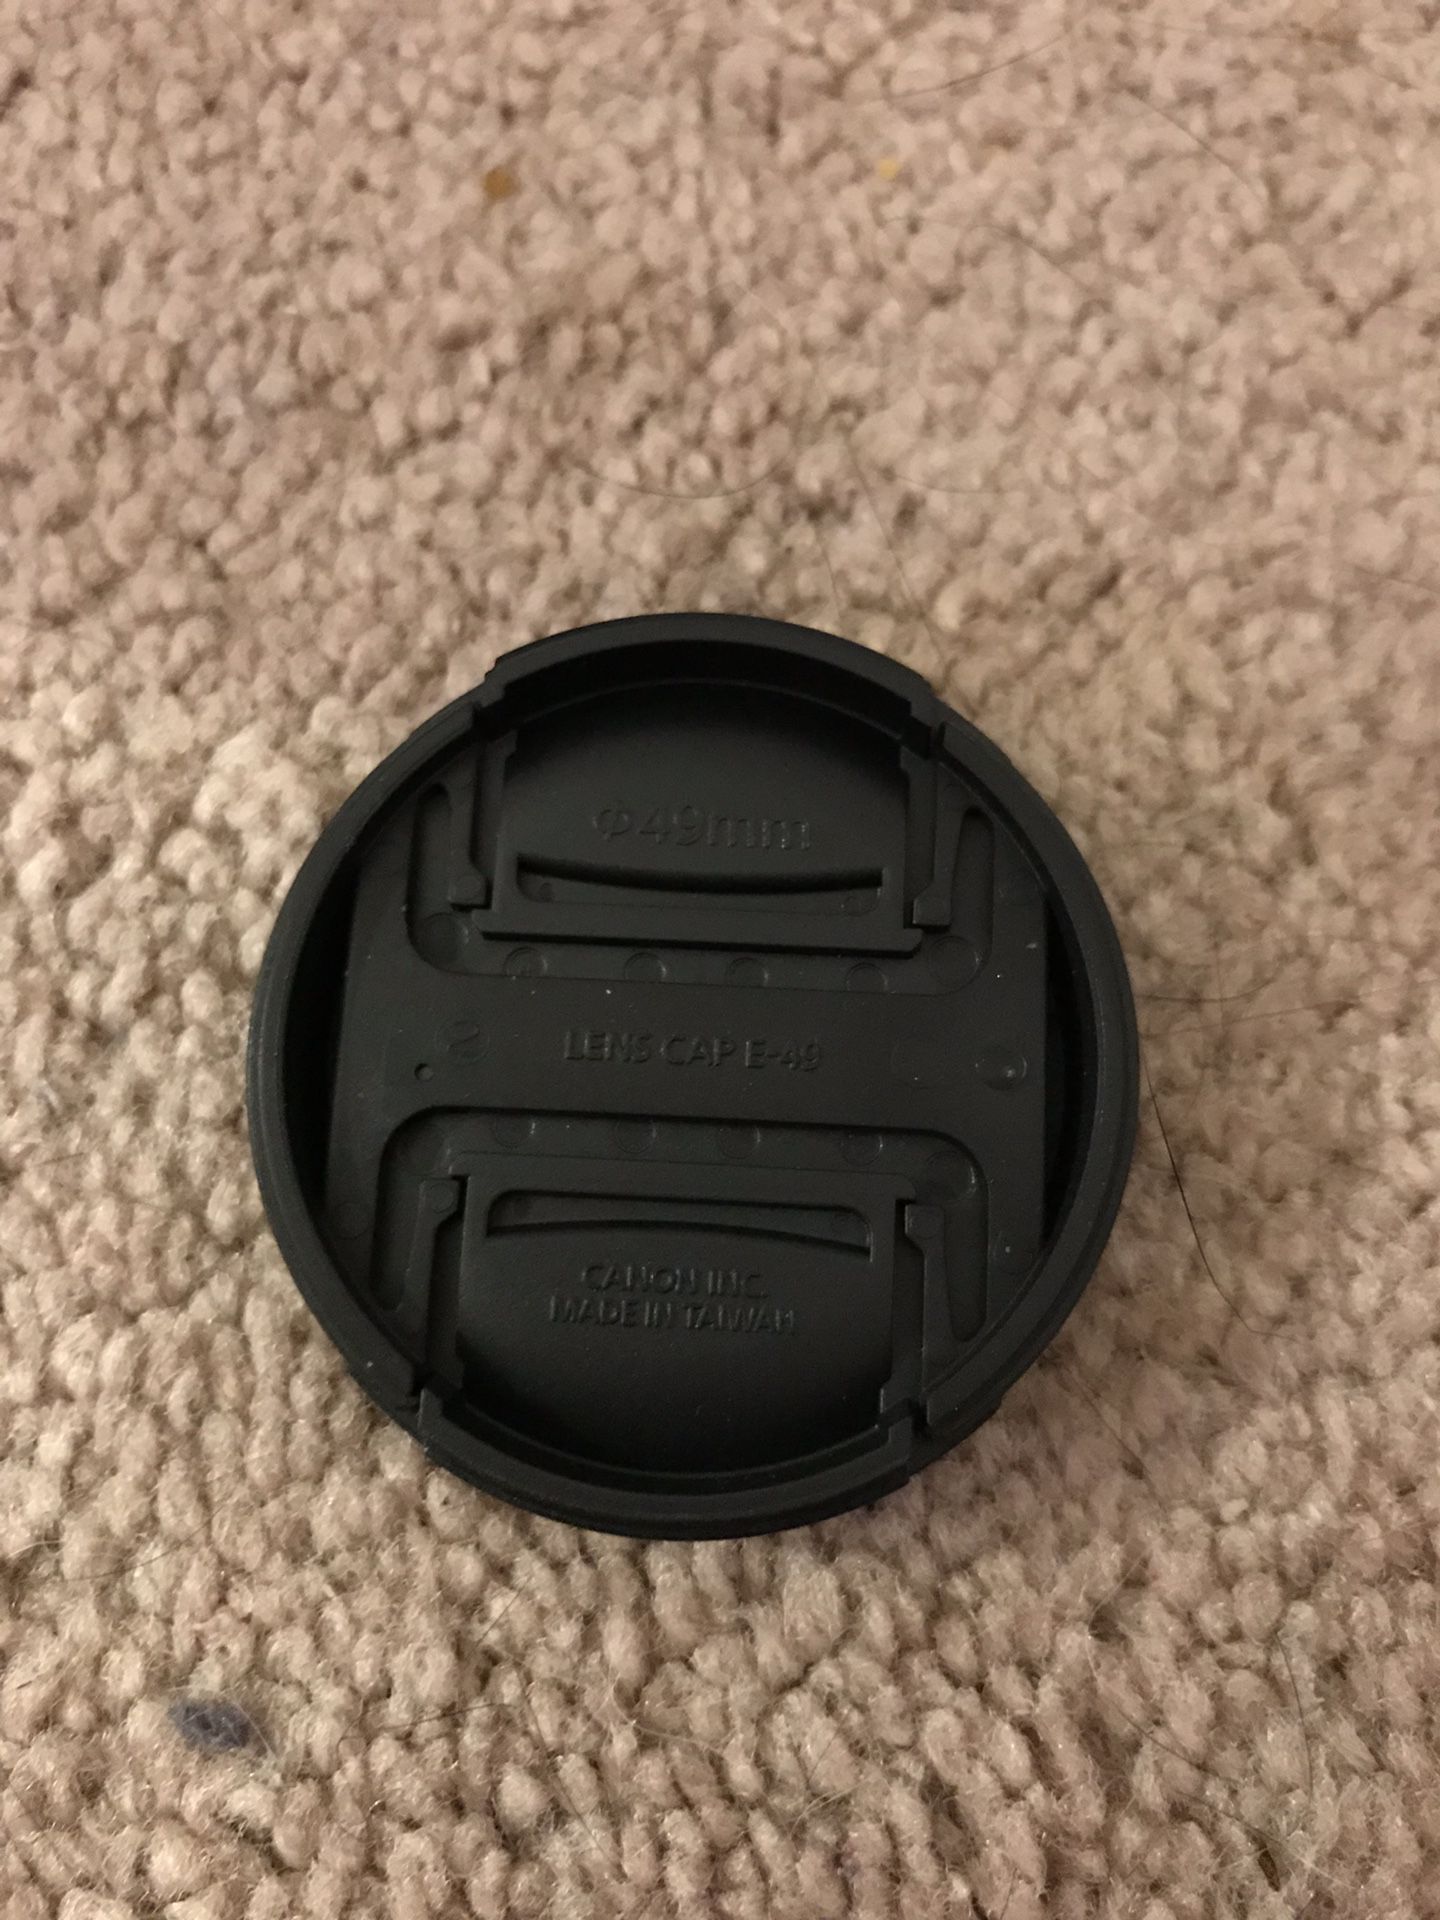 Lens cap and Lens for Canon camera